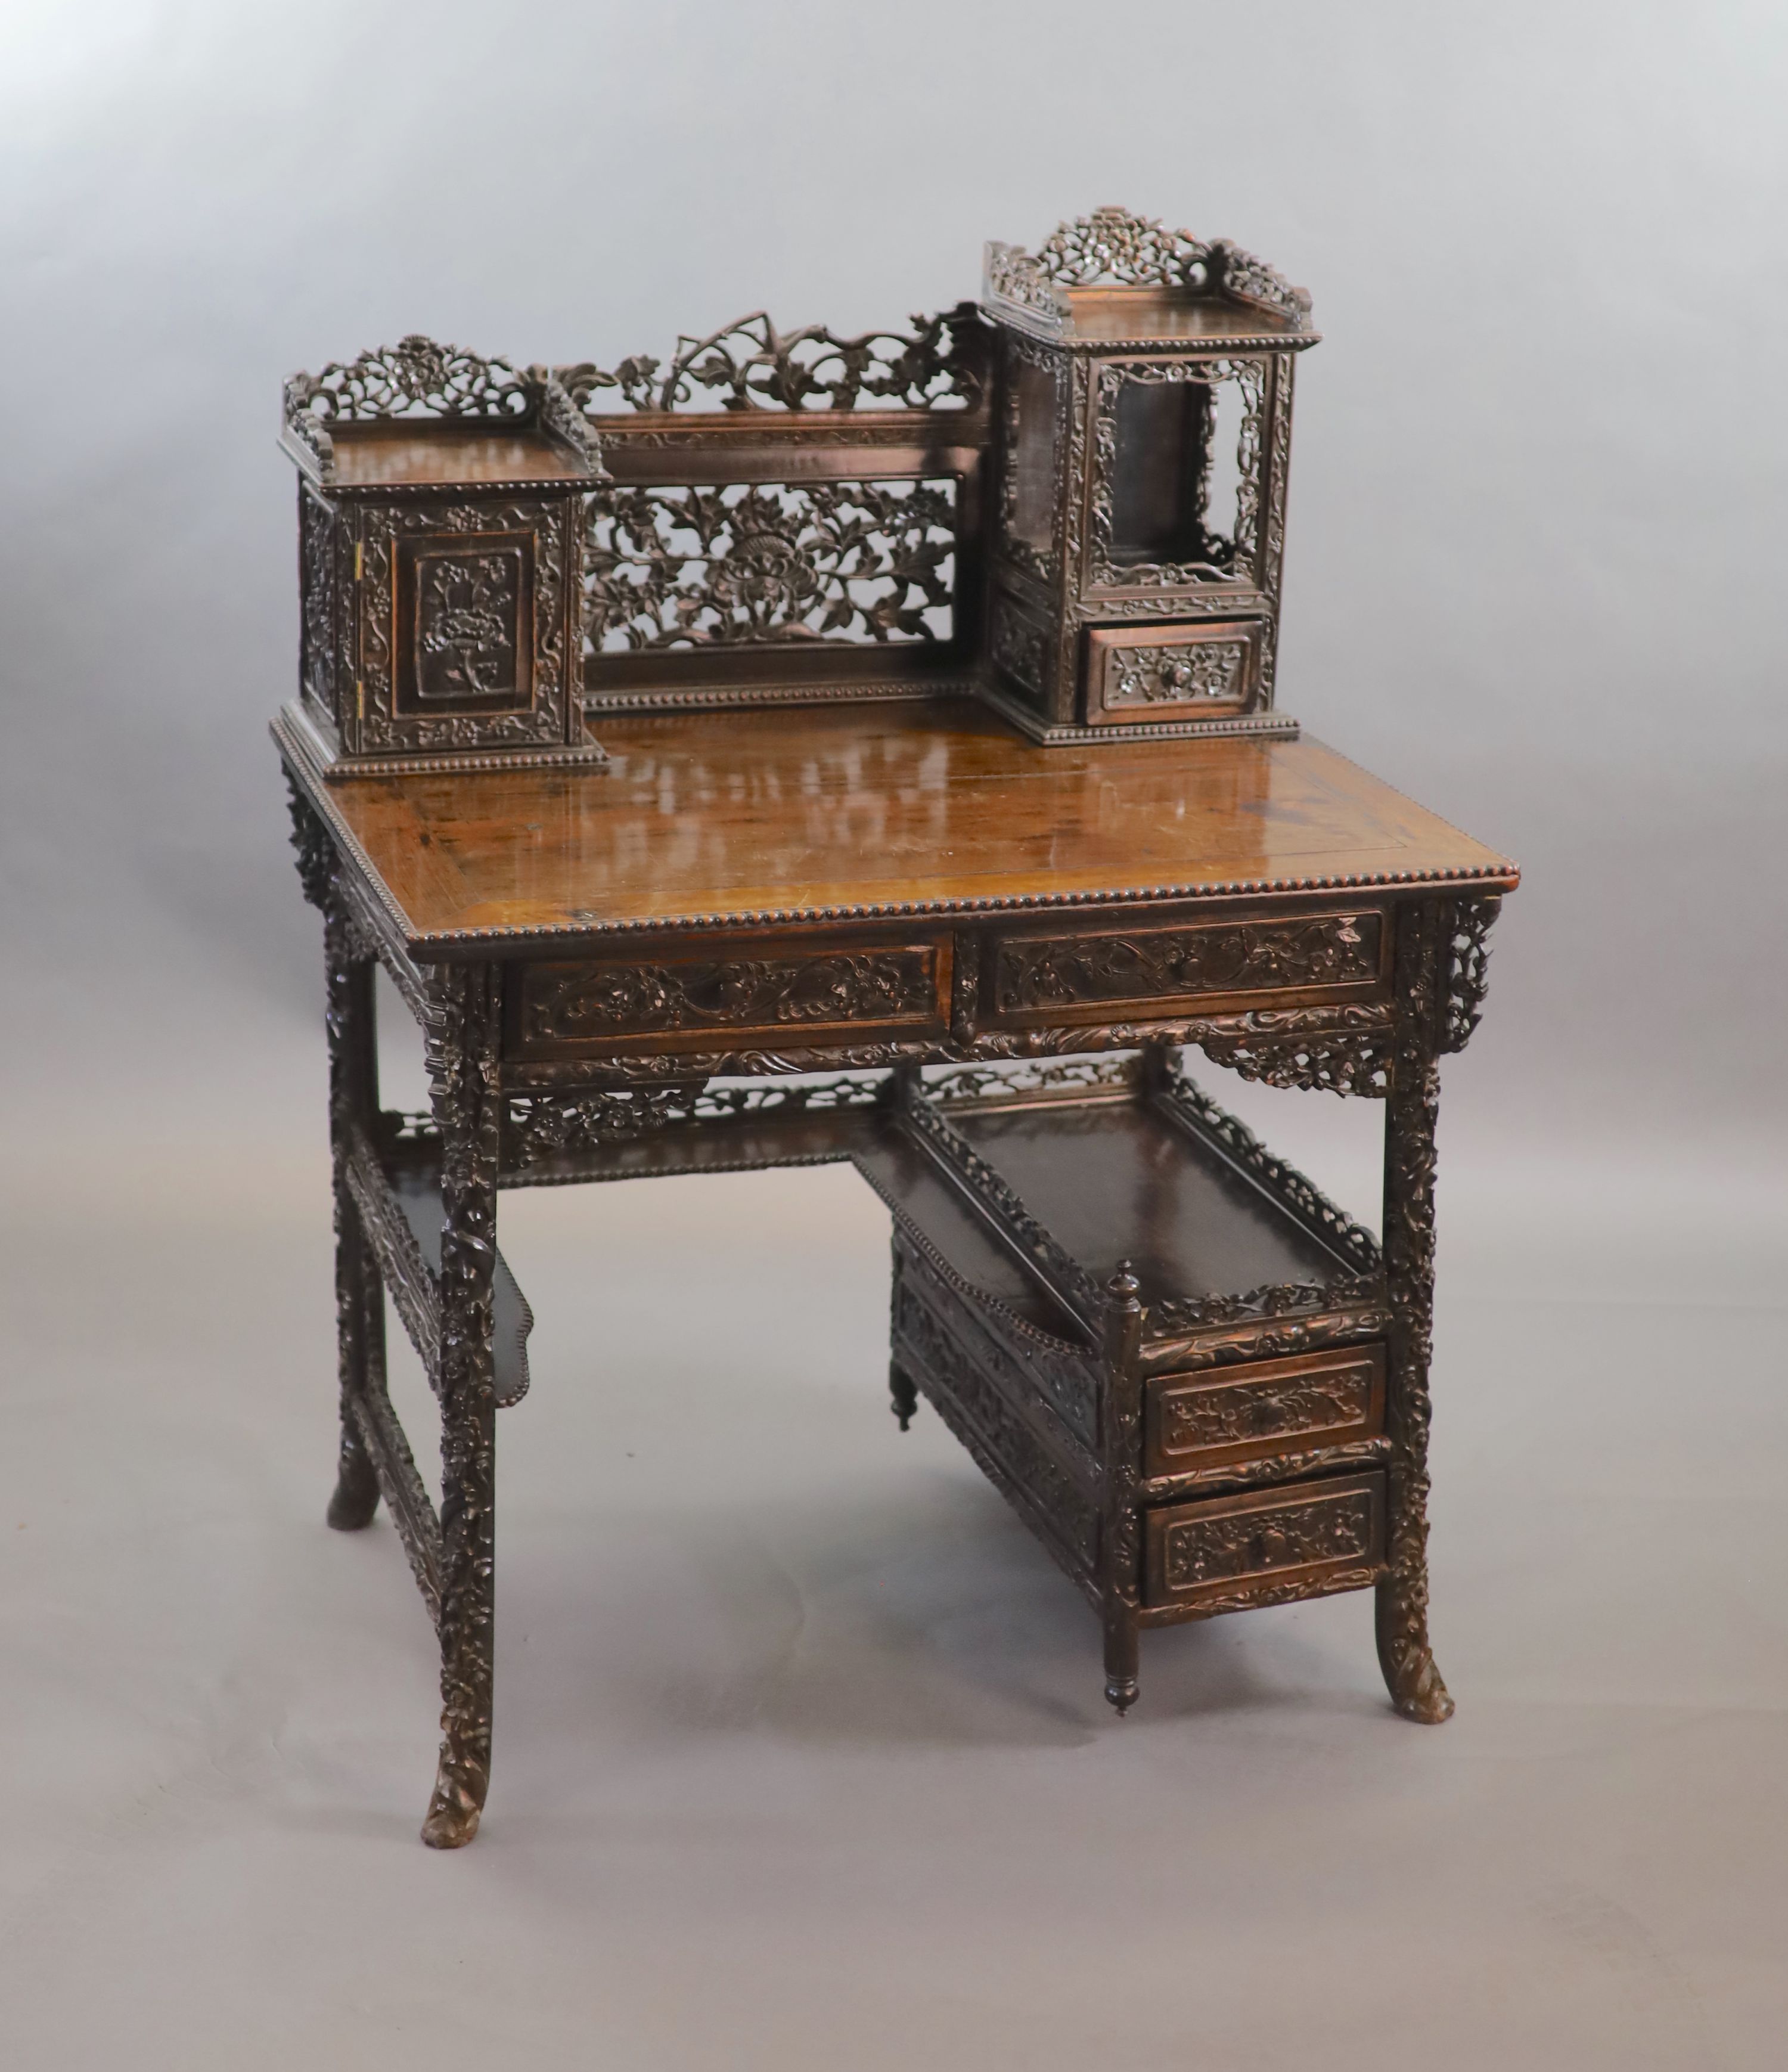 A late 19th century Chinese hongmu desk,carved and pierced throughout with flowers, the raised